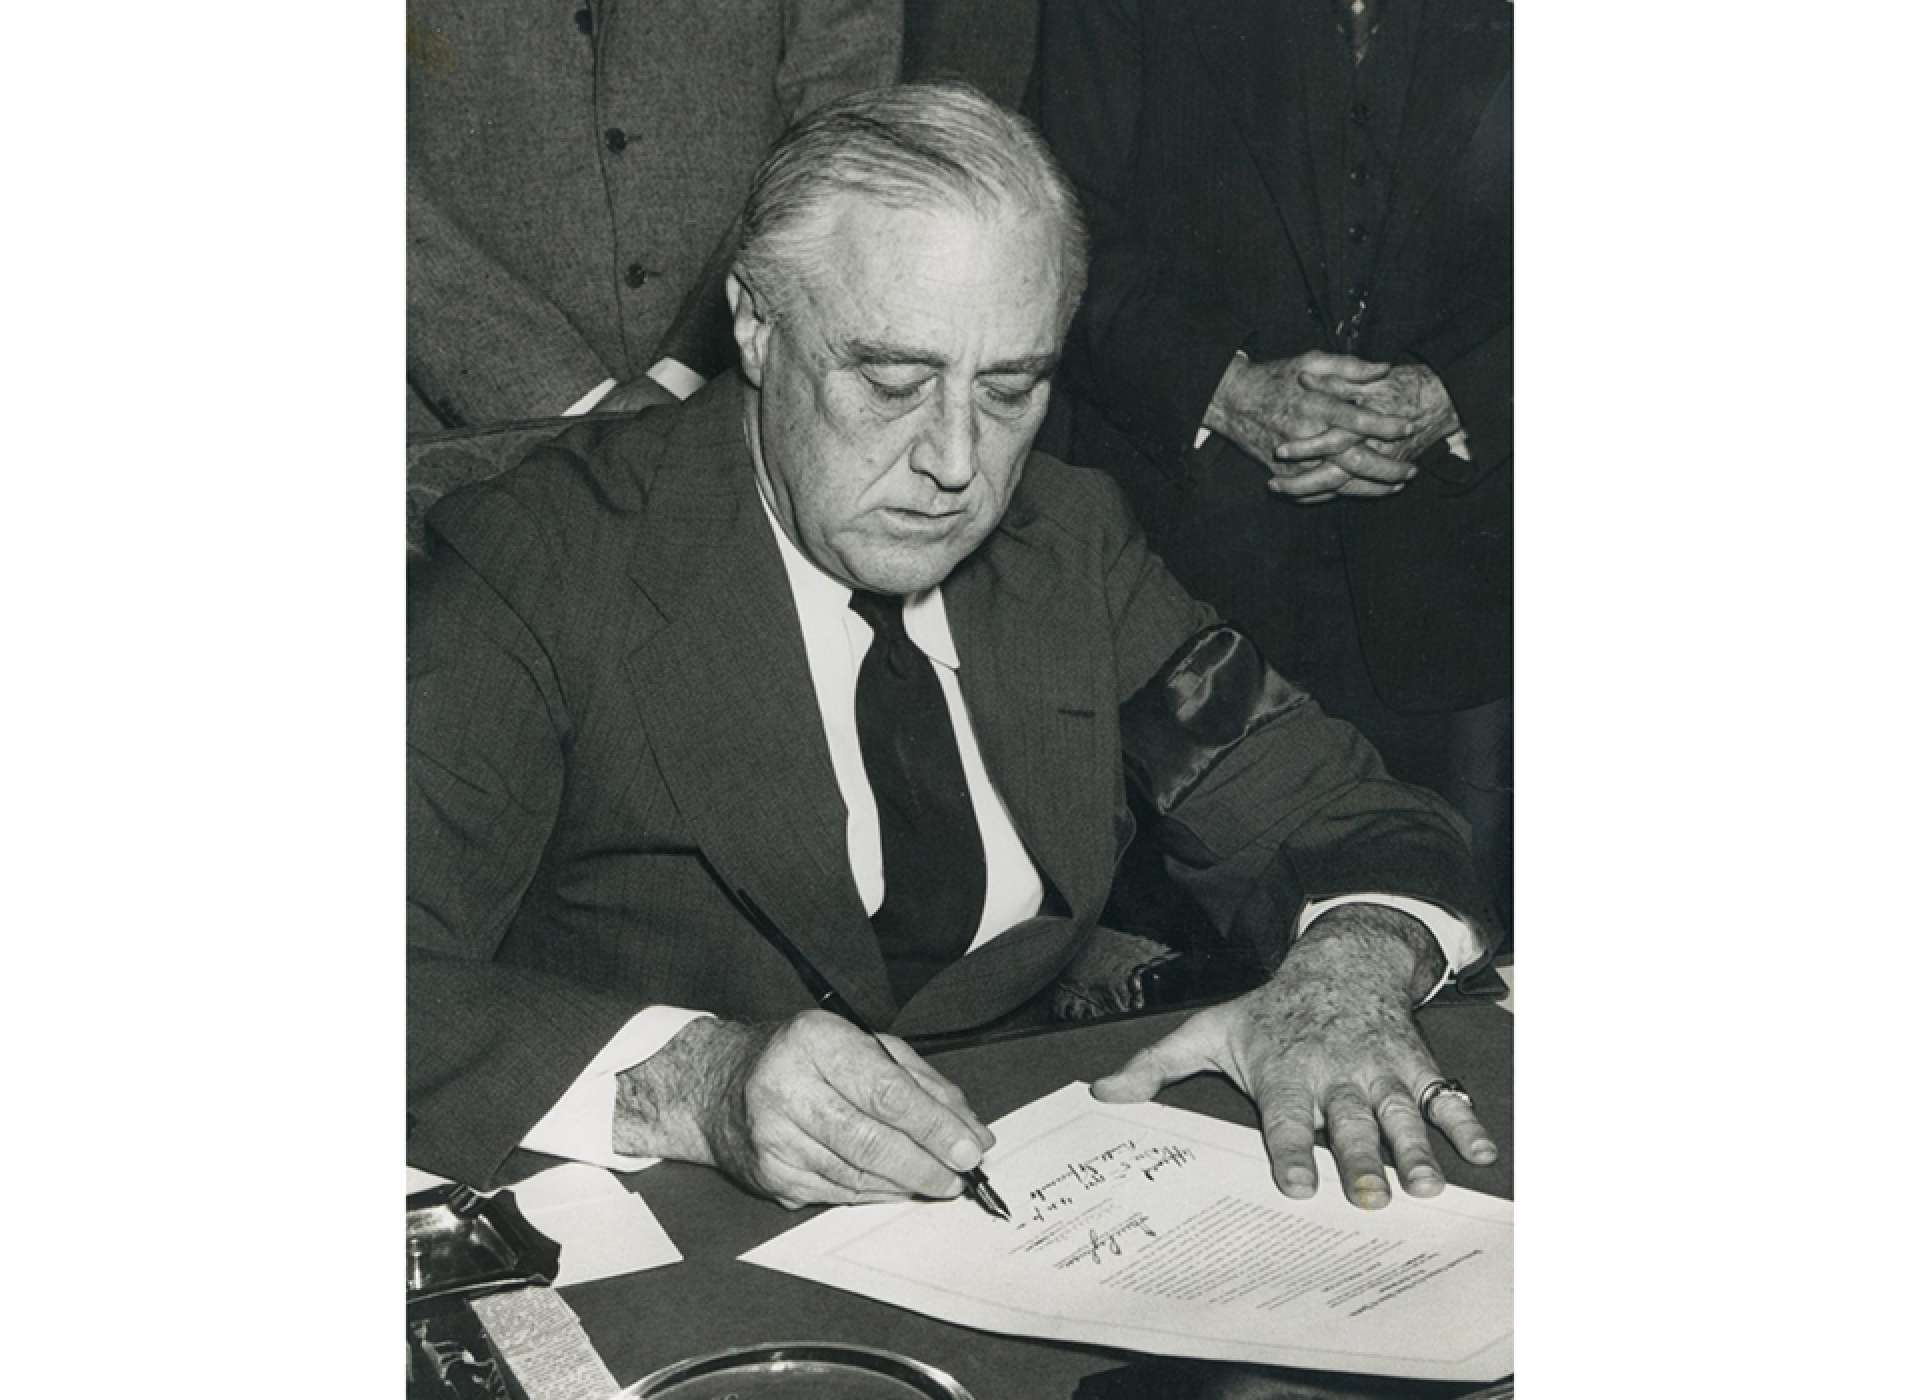 FDR signing the declaration of war against Japan on December 8, 1941. Courtesy of the National Archives.